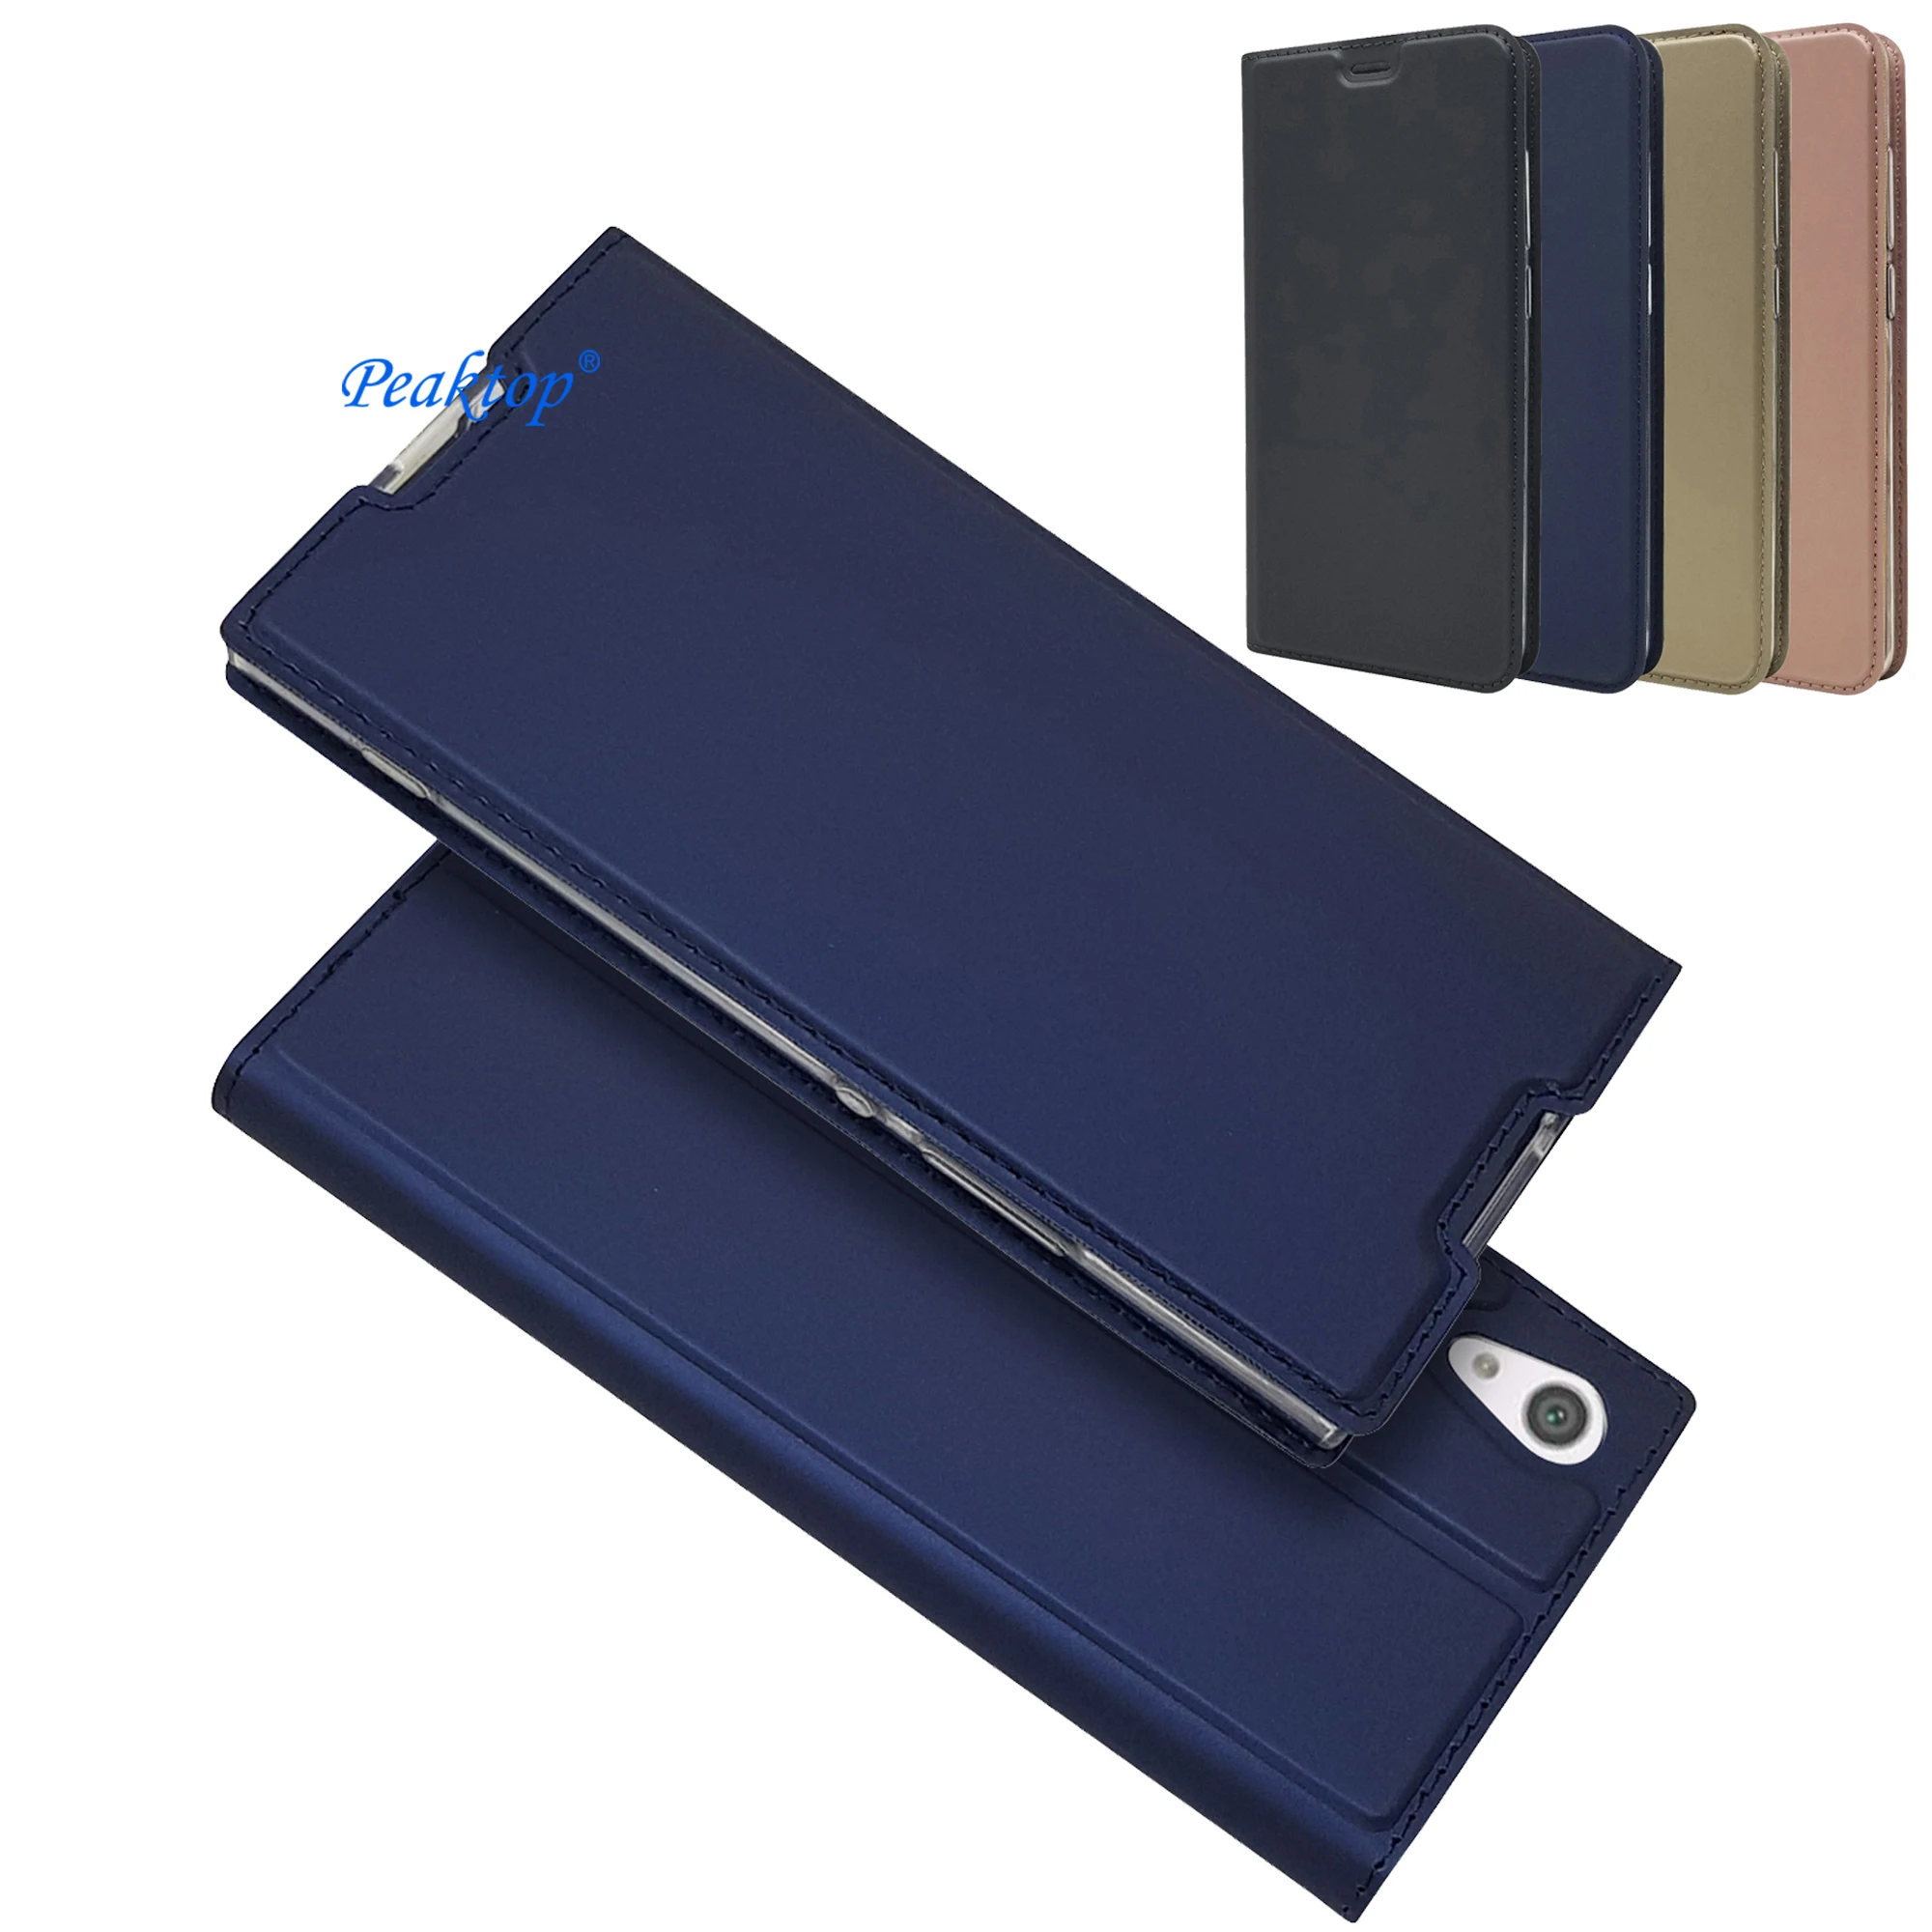 XA Magnetic PU Leather cases Etui For Sony Xperia XA X A Cover Flip capa For Sony XA xa1 F3111 F3112 F3113 F3115 F3116 Coque bag